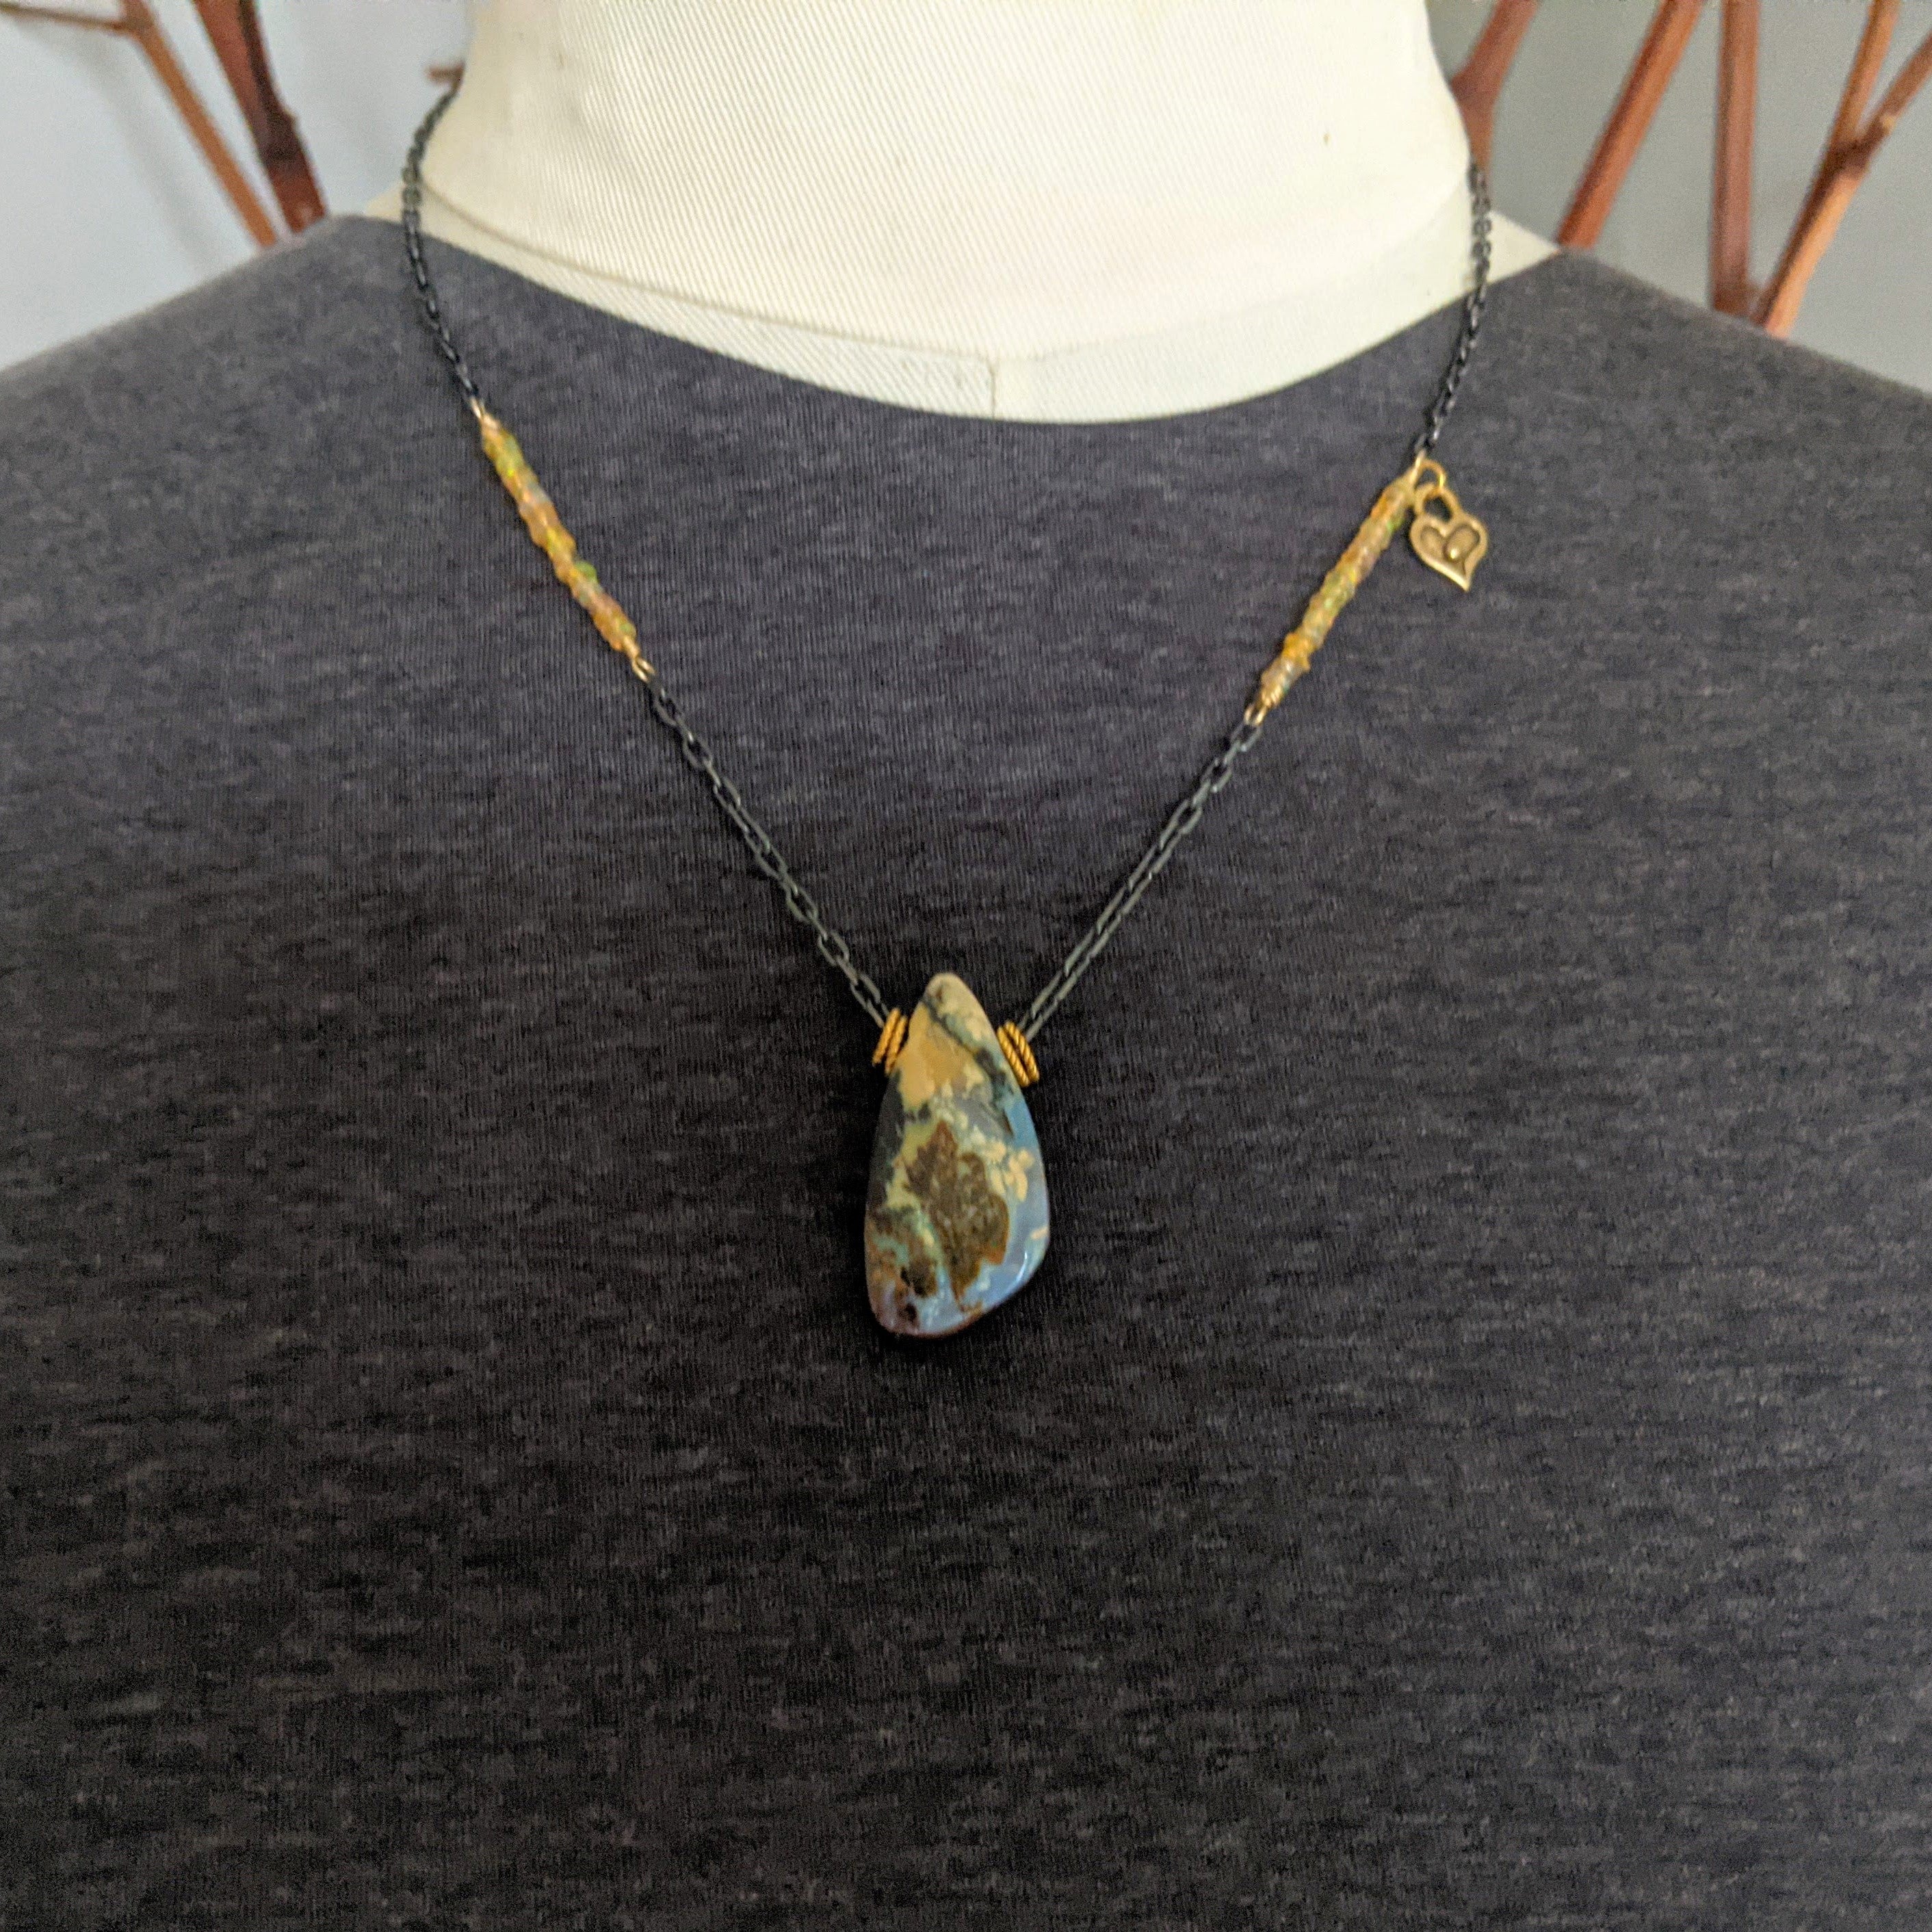 Australian Koroit Boulder opal necklace. Unique one of a kind jewelry. Chain necklace.  Gemstone necklace. Handcrafted by Aurora Creative Jewellery.